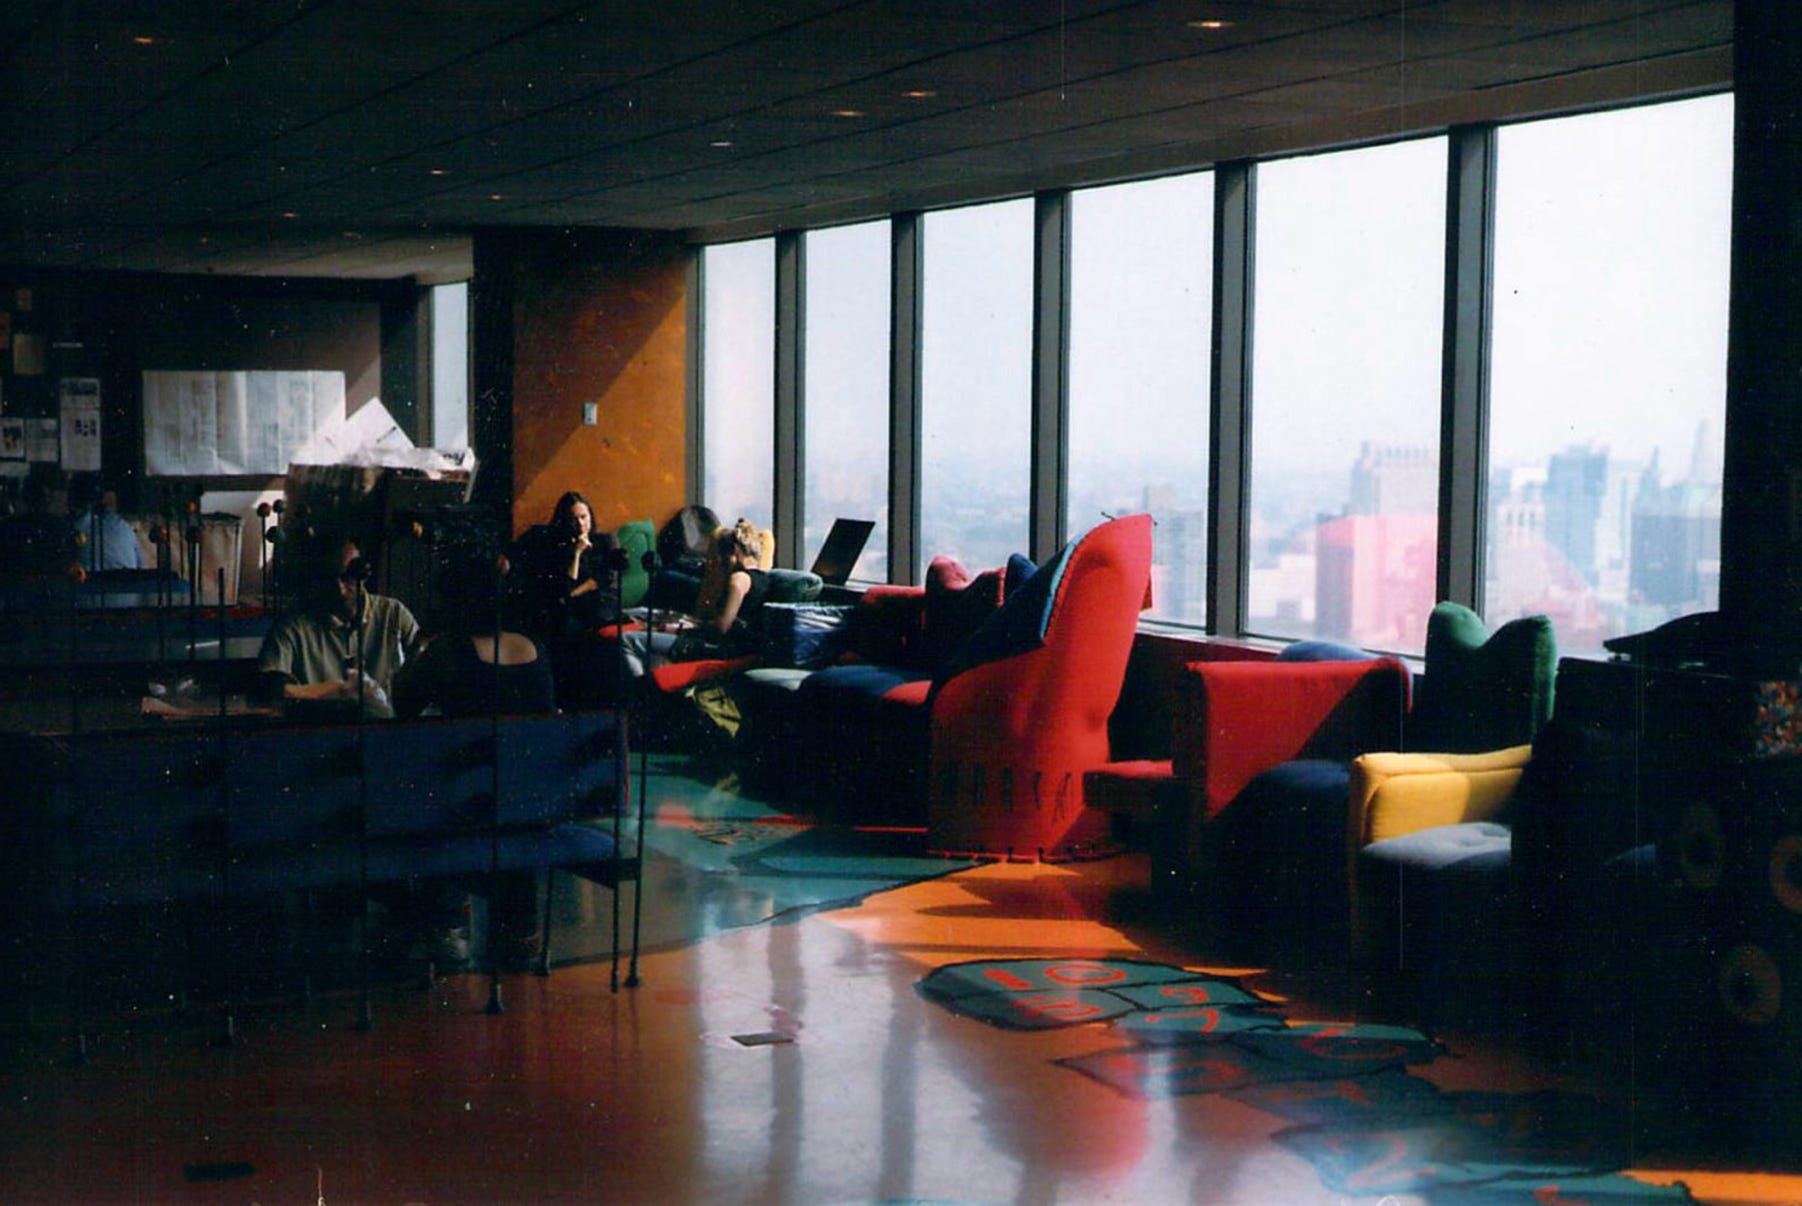 The Chiat/Day office in New York in 1995.  Photo by Donatella Brun and originally published in Domus 769, March 1995.